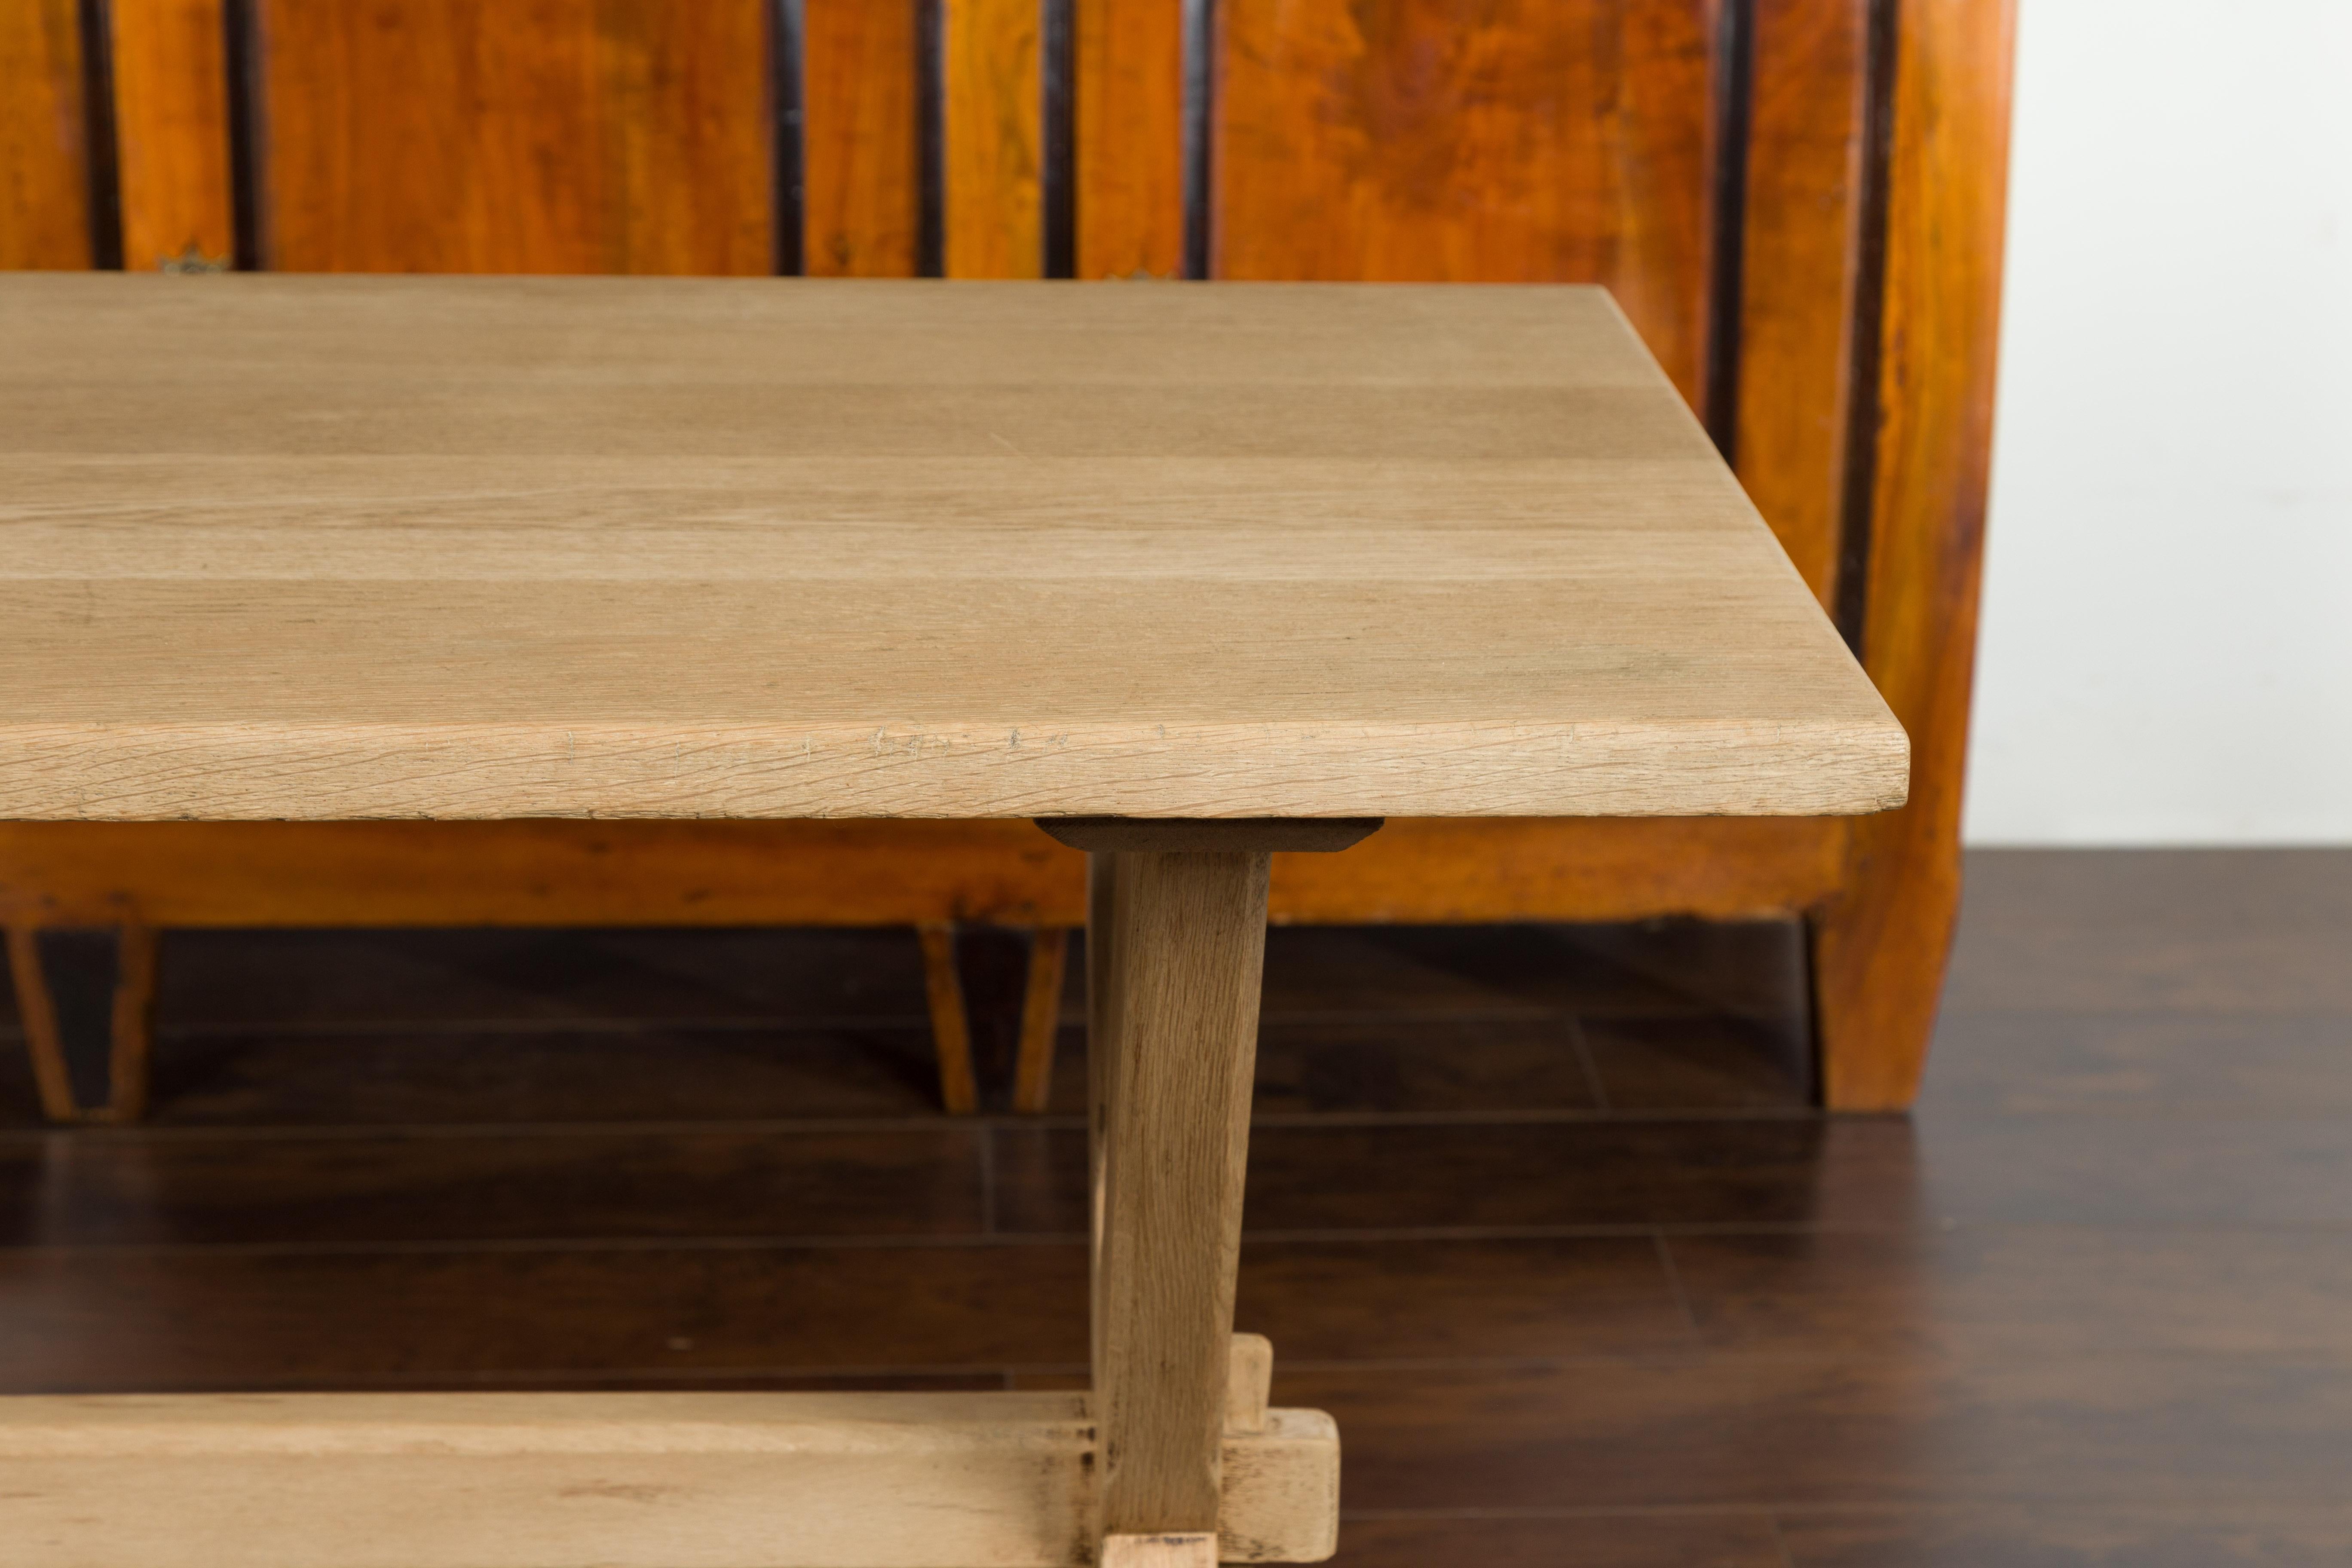 20th Century English Turn of the Century Oak Sawbuck Table with X-Form Base, circa 1900 For Sale